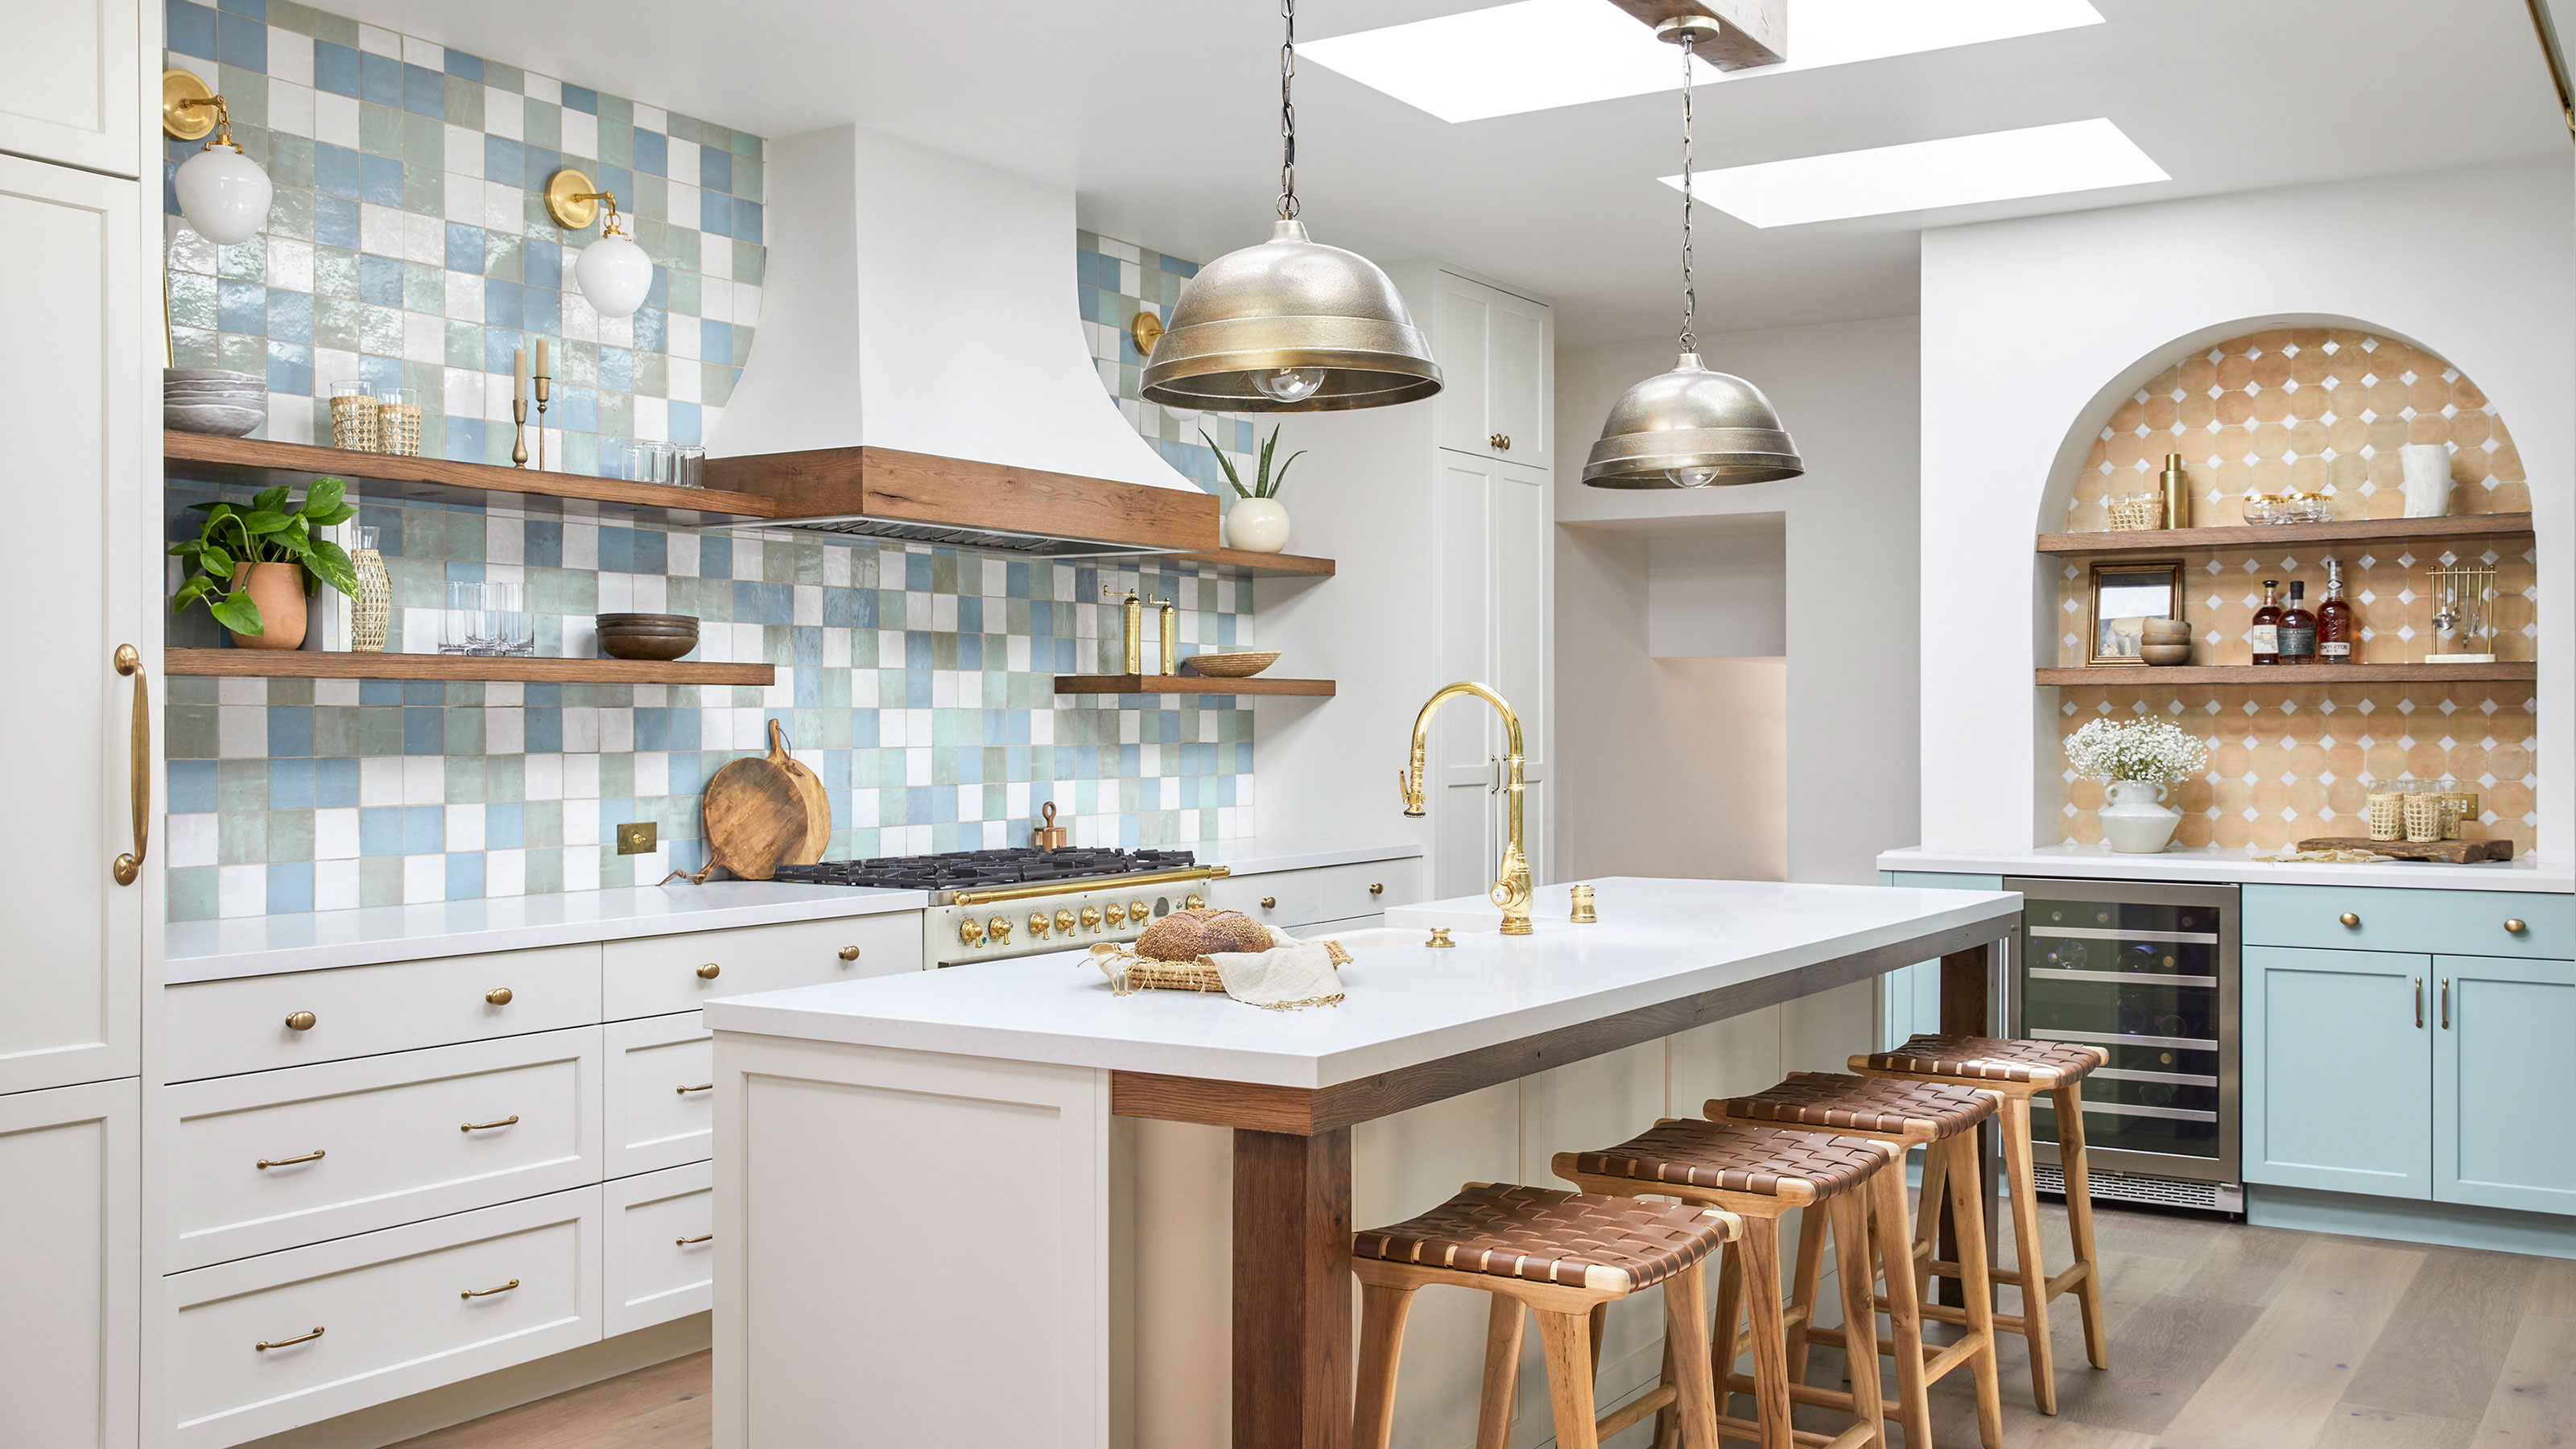 Bright kitchen remodel brings new life to original features ...